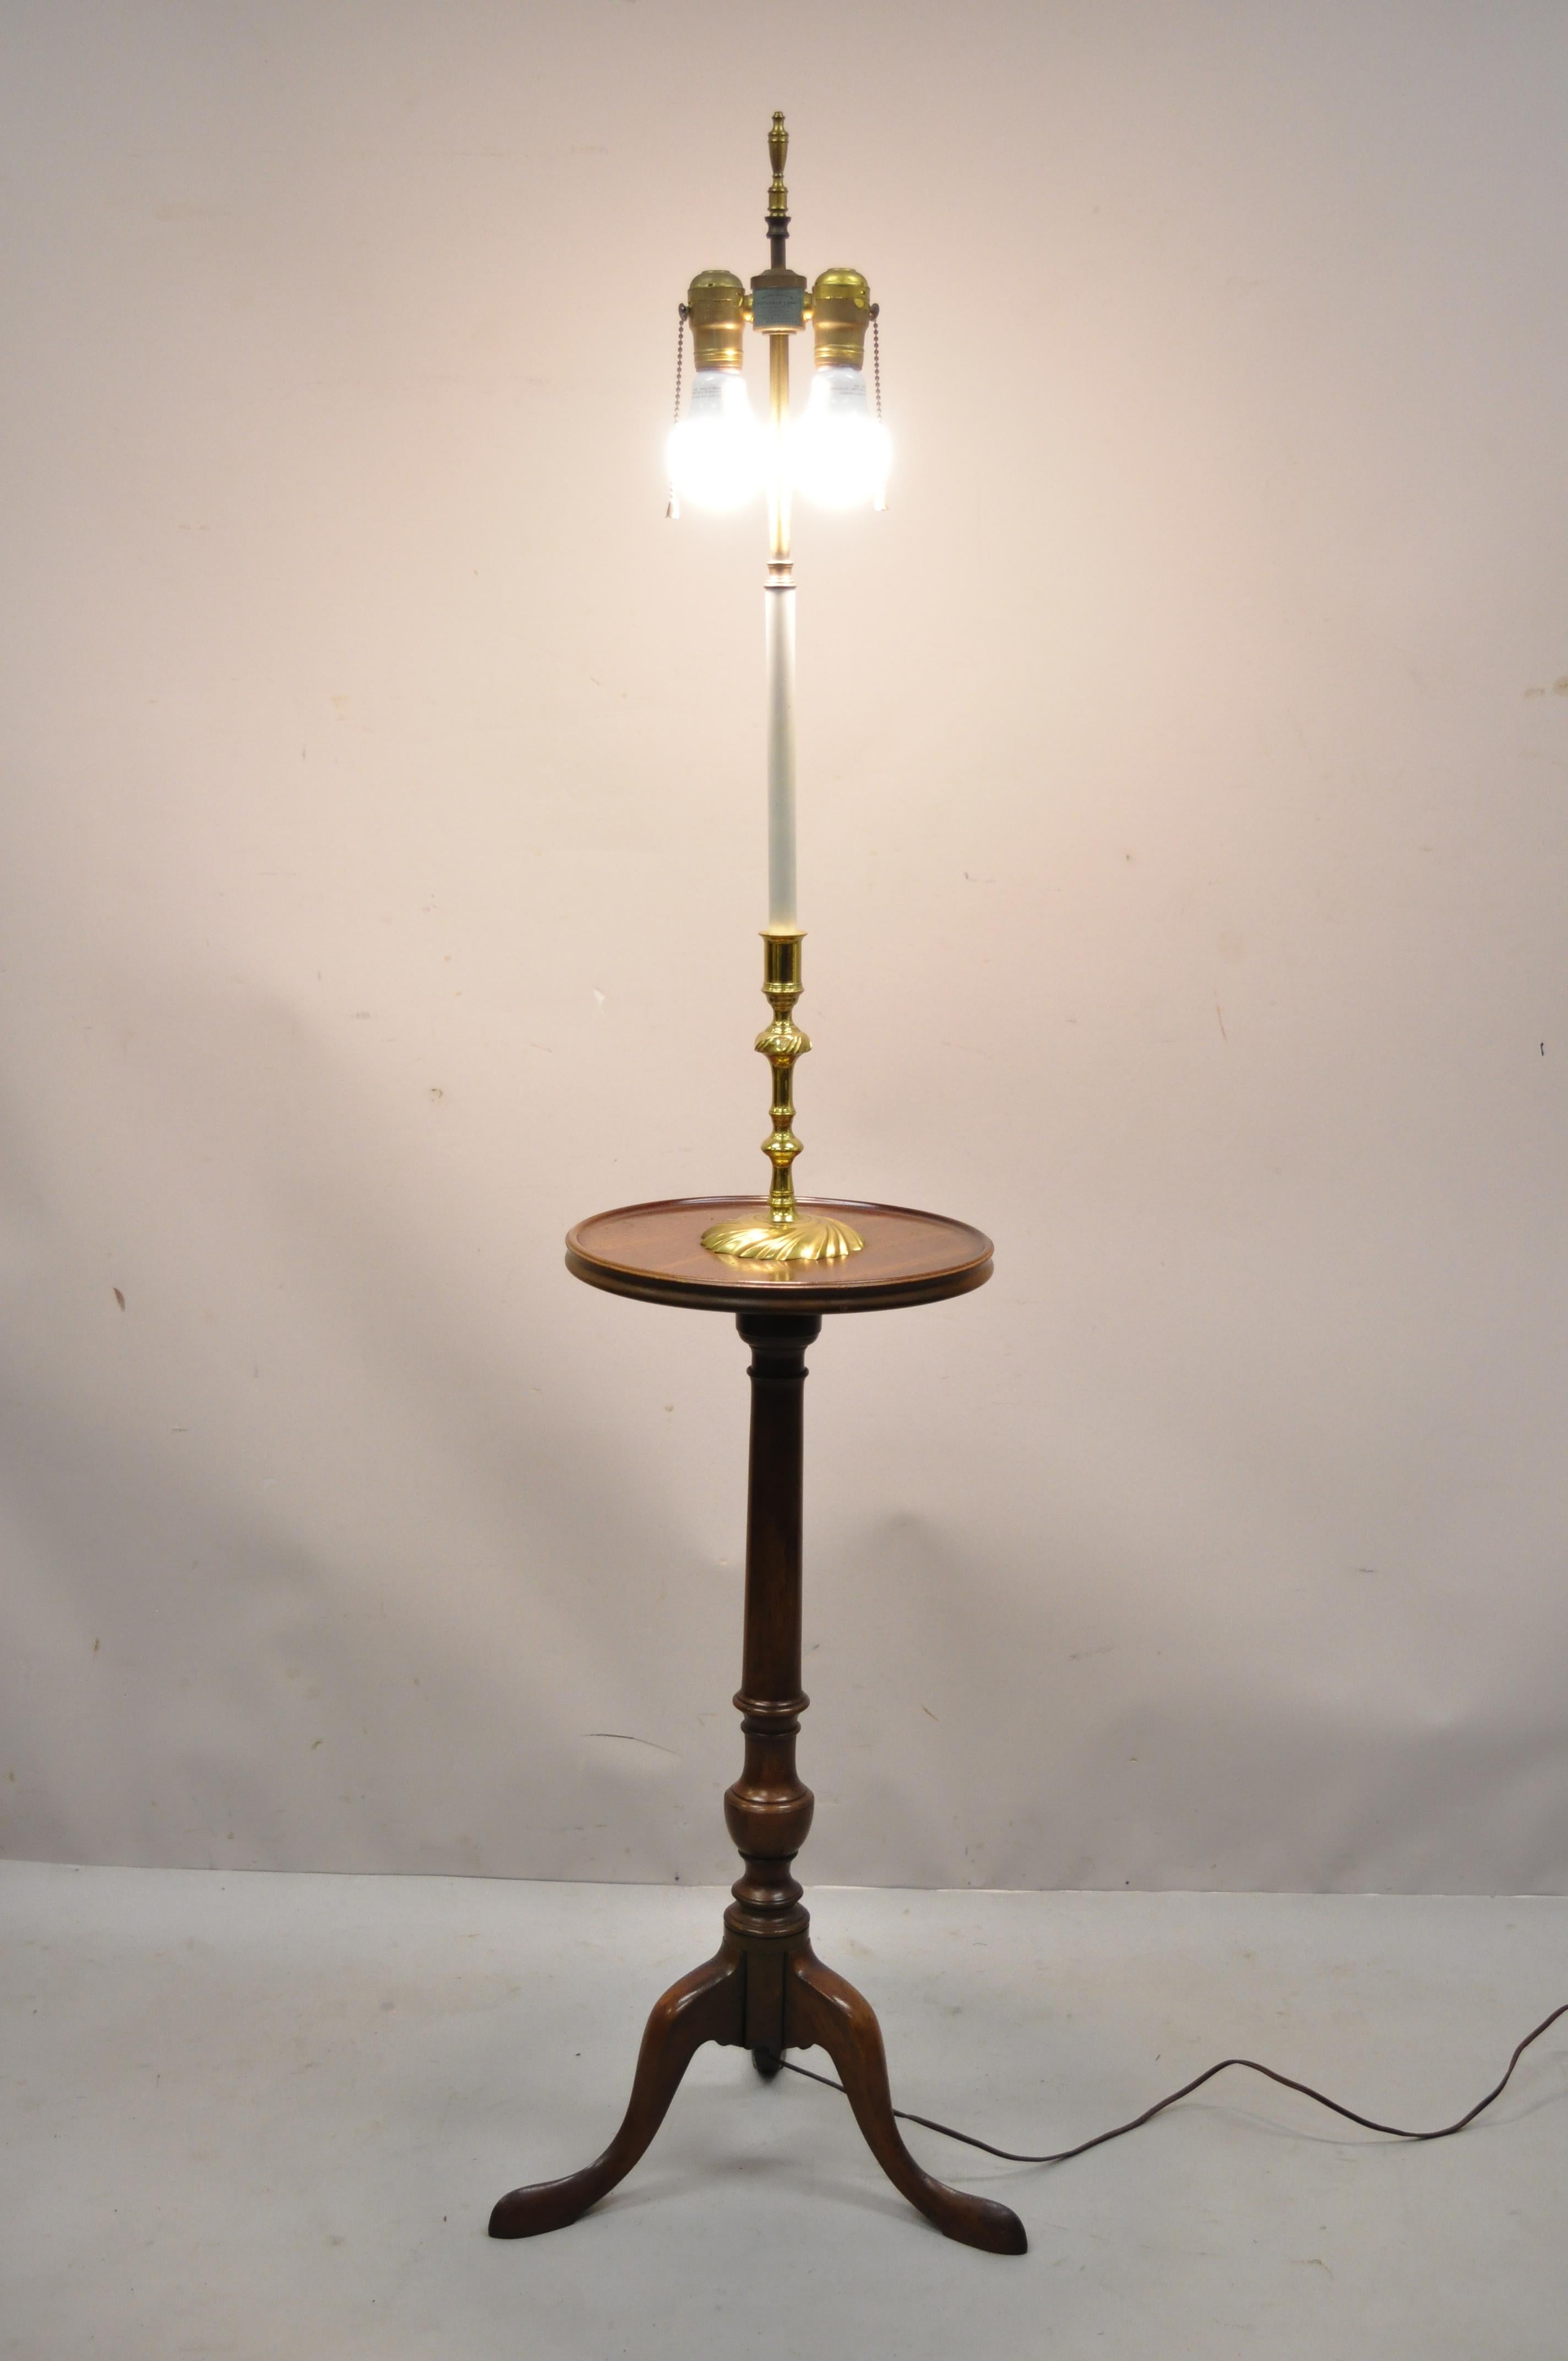 Knob Creek of Morganton cherry wood brass candlestick floor lamp side table. Item features solid brass 